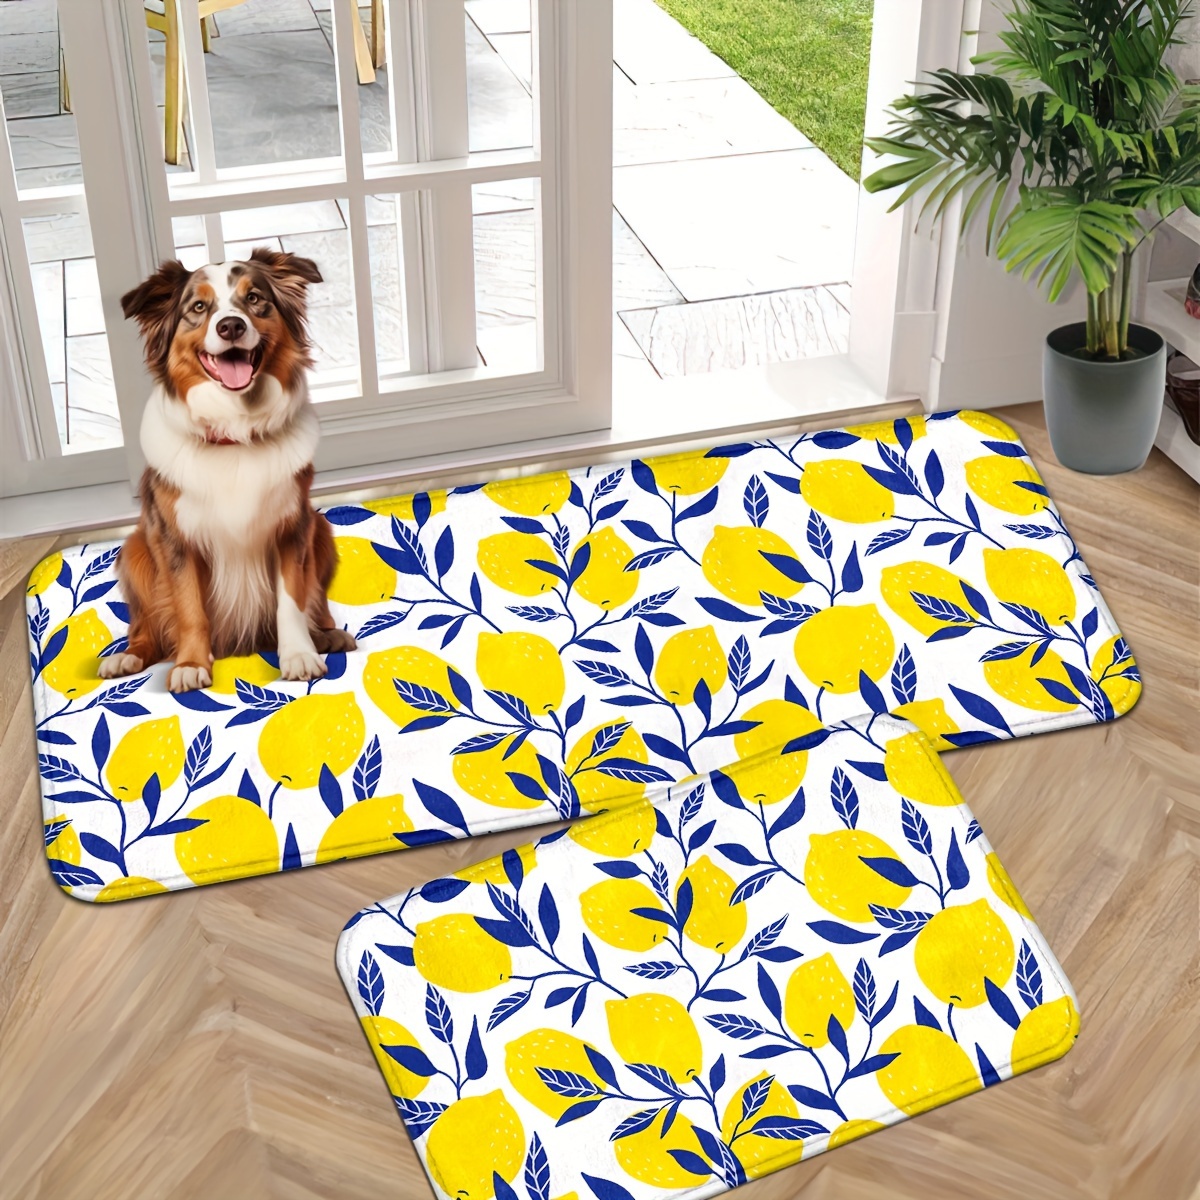 

Lemon Printed Kitchen Mats - Non-slip, Machine Washable Knit Polyester Rugs - Durable And Comfortable Runner Carpets For Home, Office, Sink, Laundry Room - Spring Decor, Multiple Sizes Available